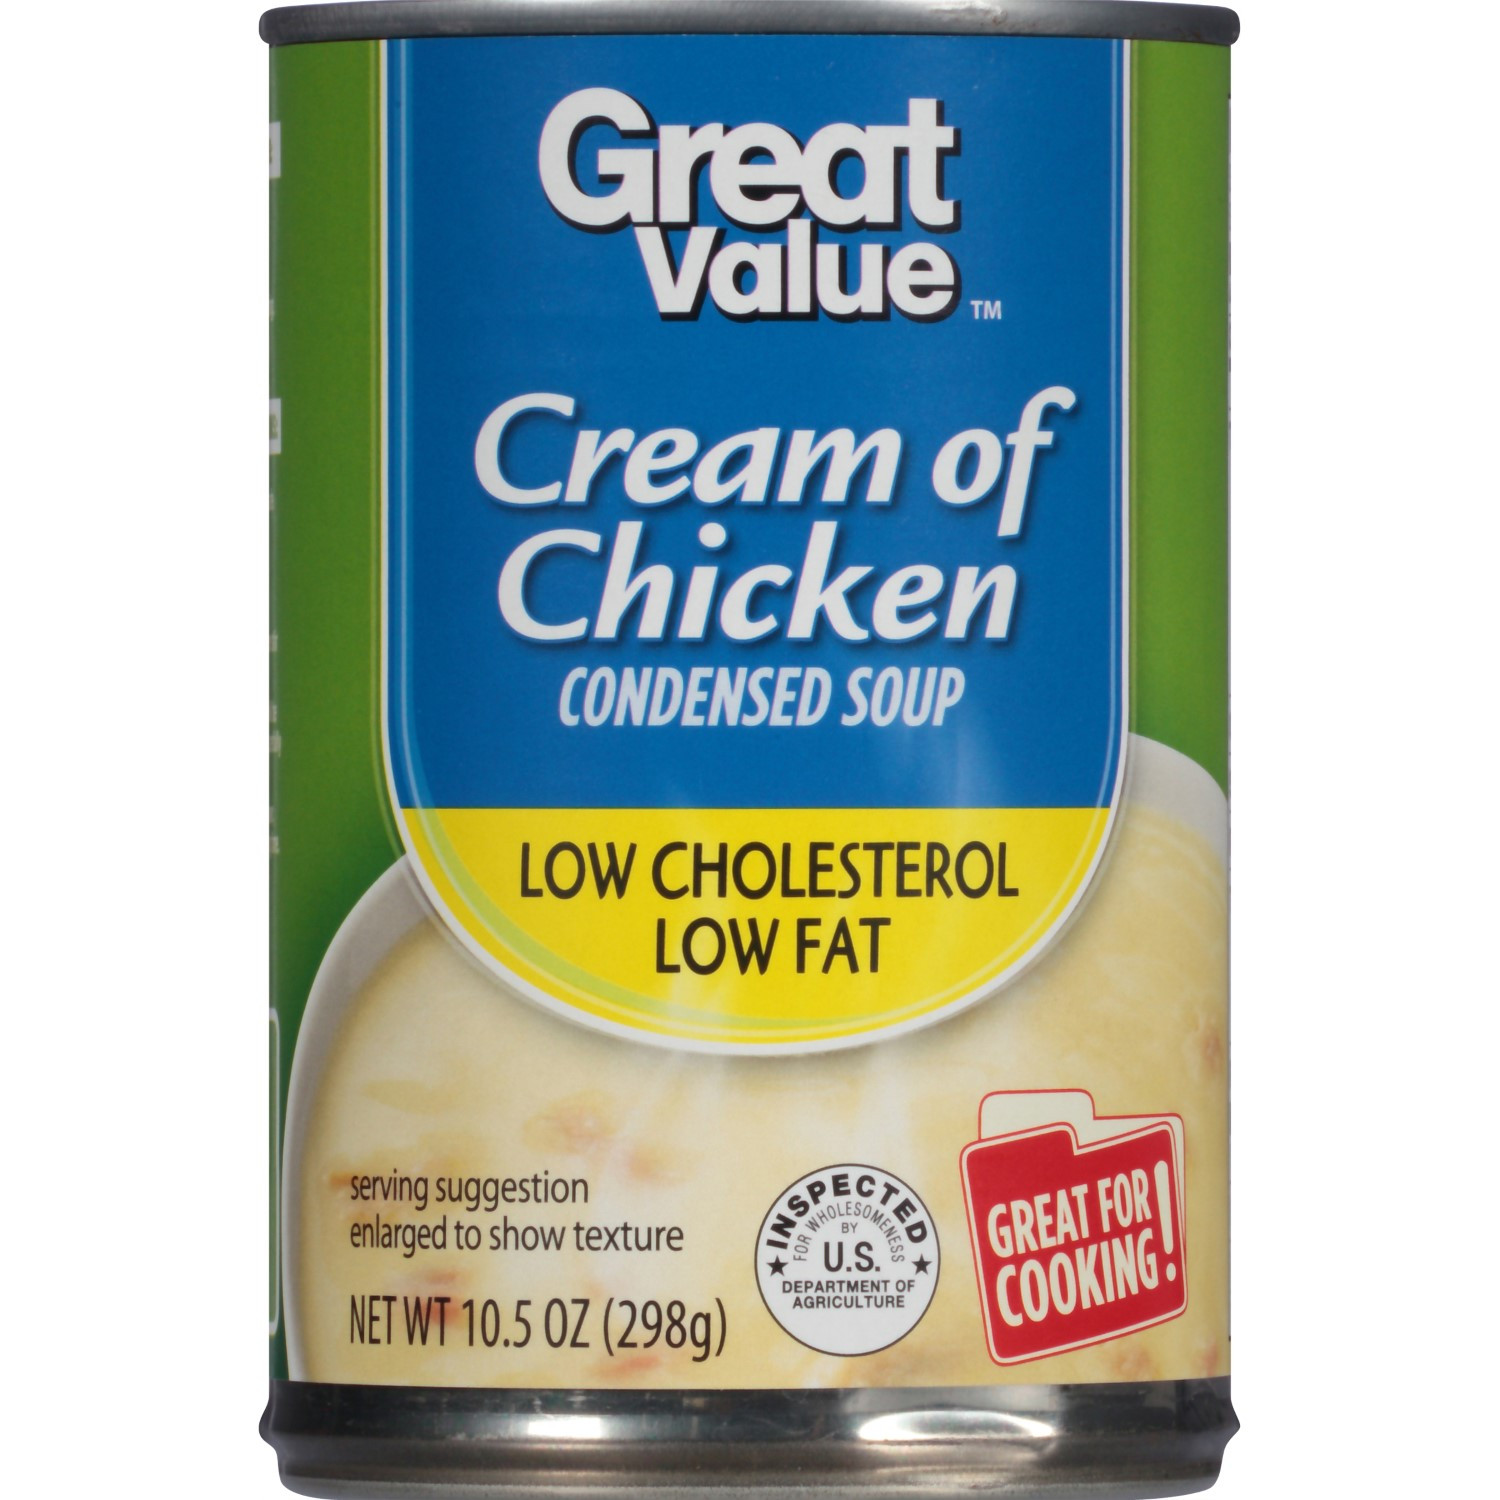 Organic Cream Of Chicken Soup
 Great Value Condensed Soup Cream of Chicken Reduced